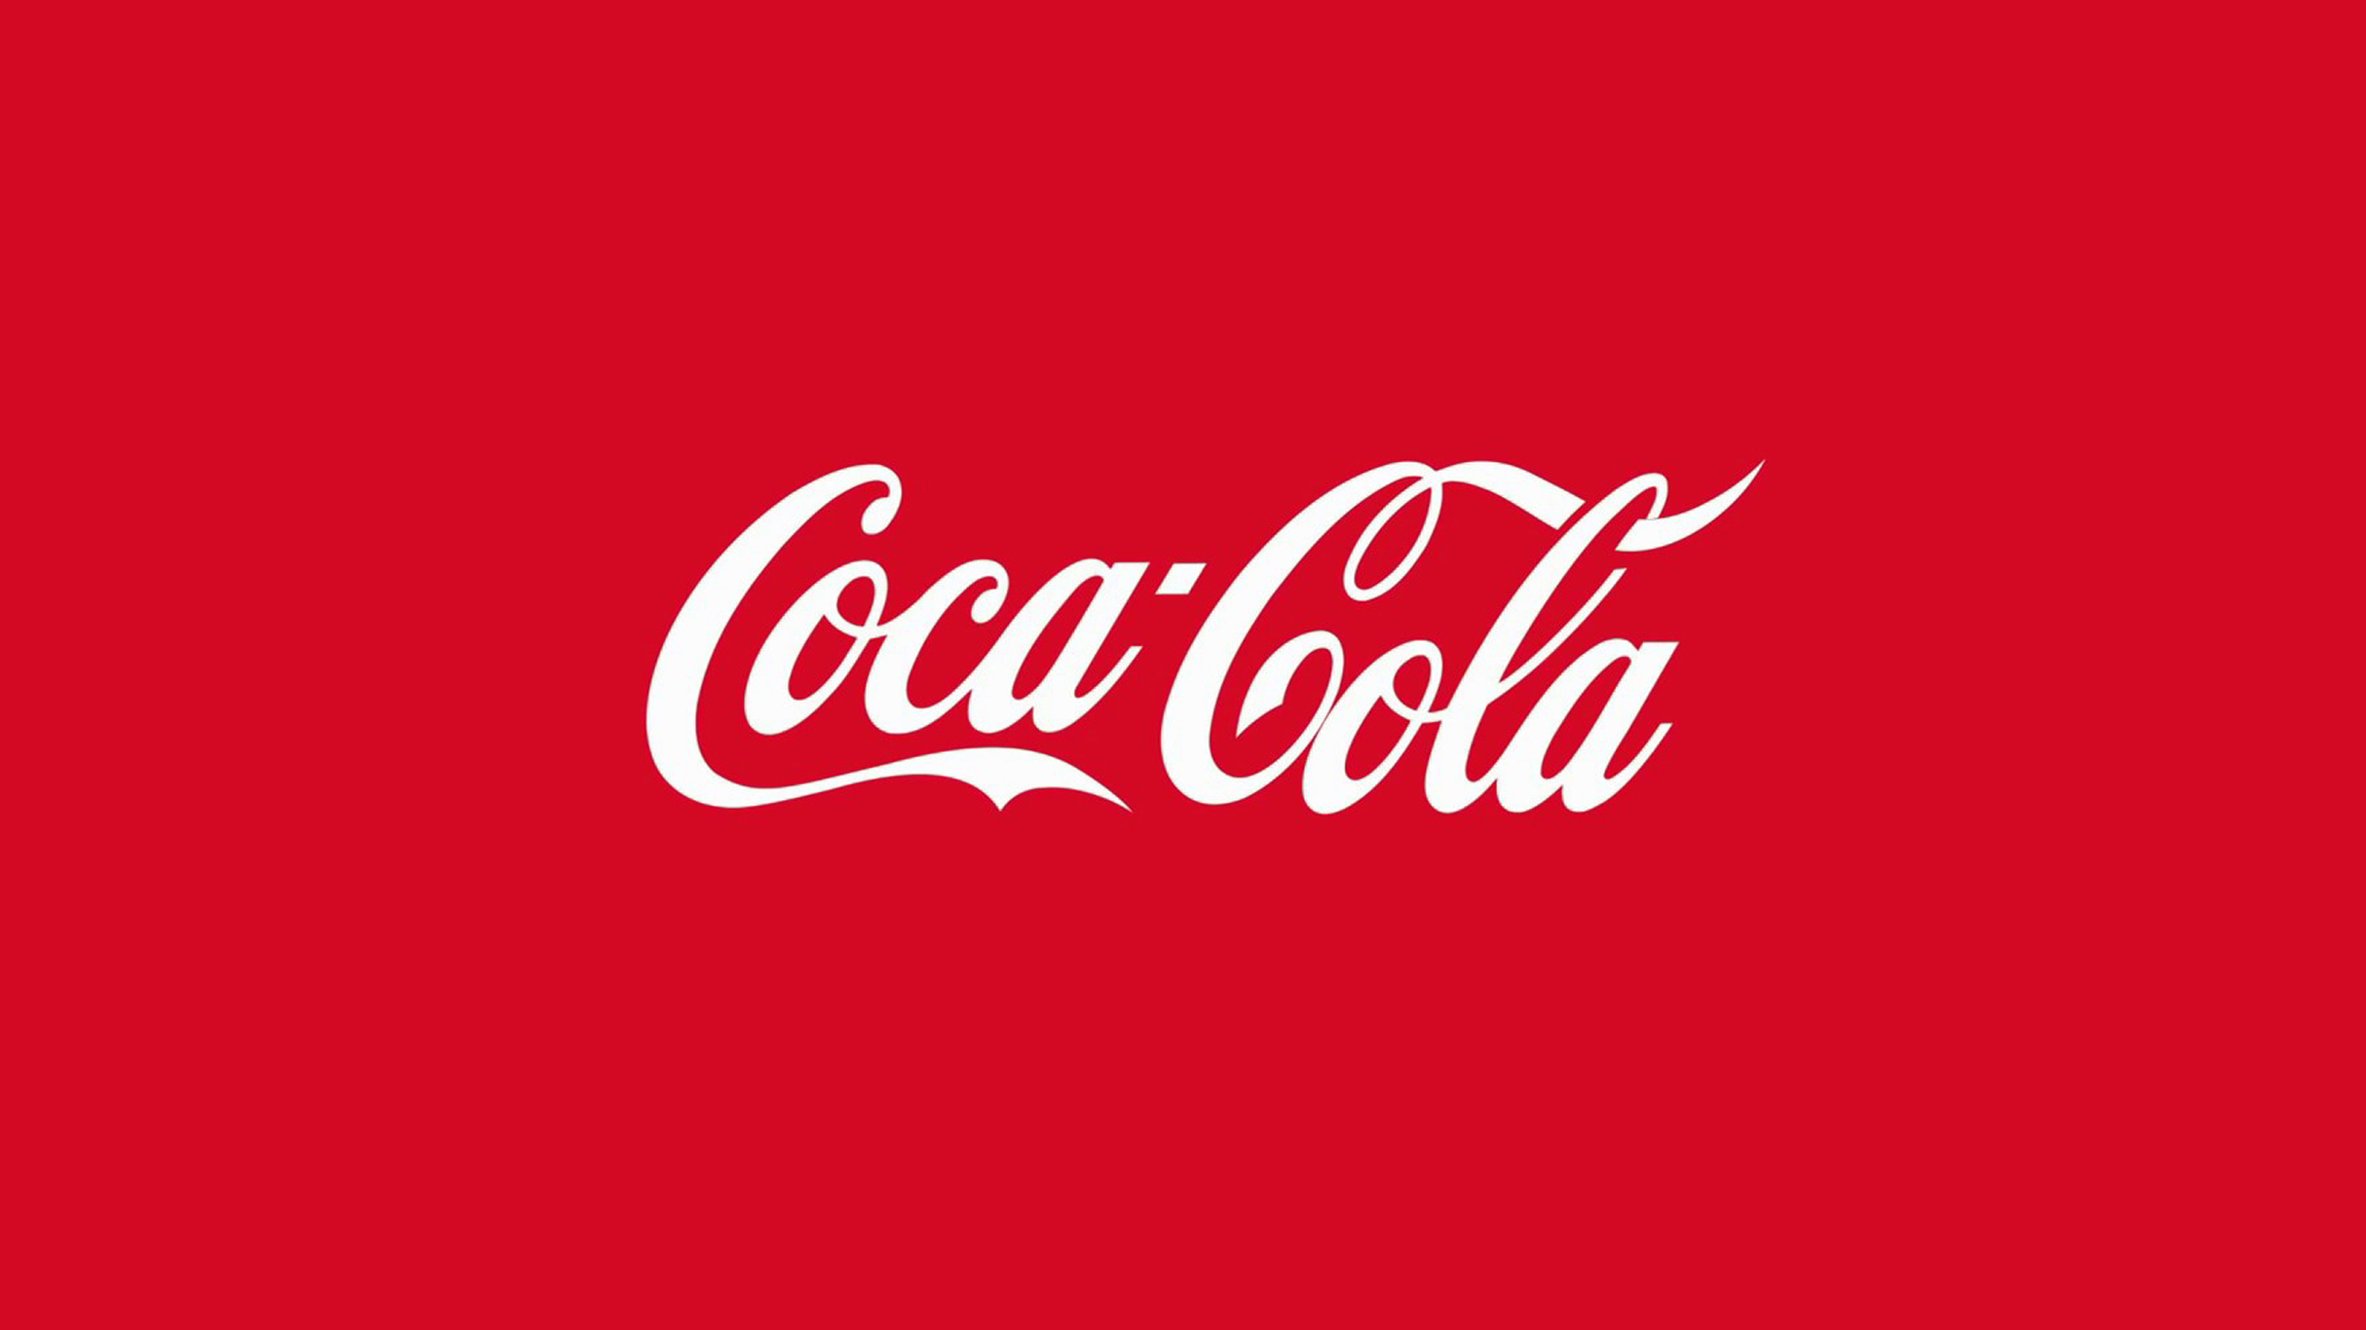 Casting Lead Roles For A Coca-Cola Commercial!